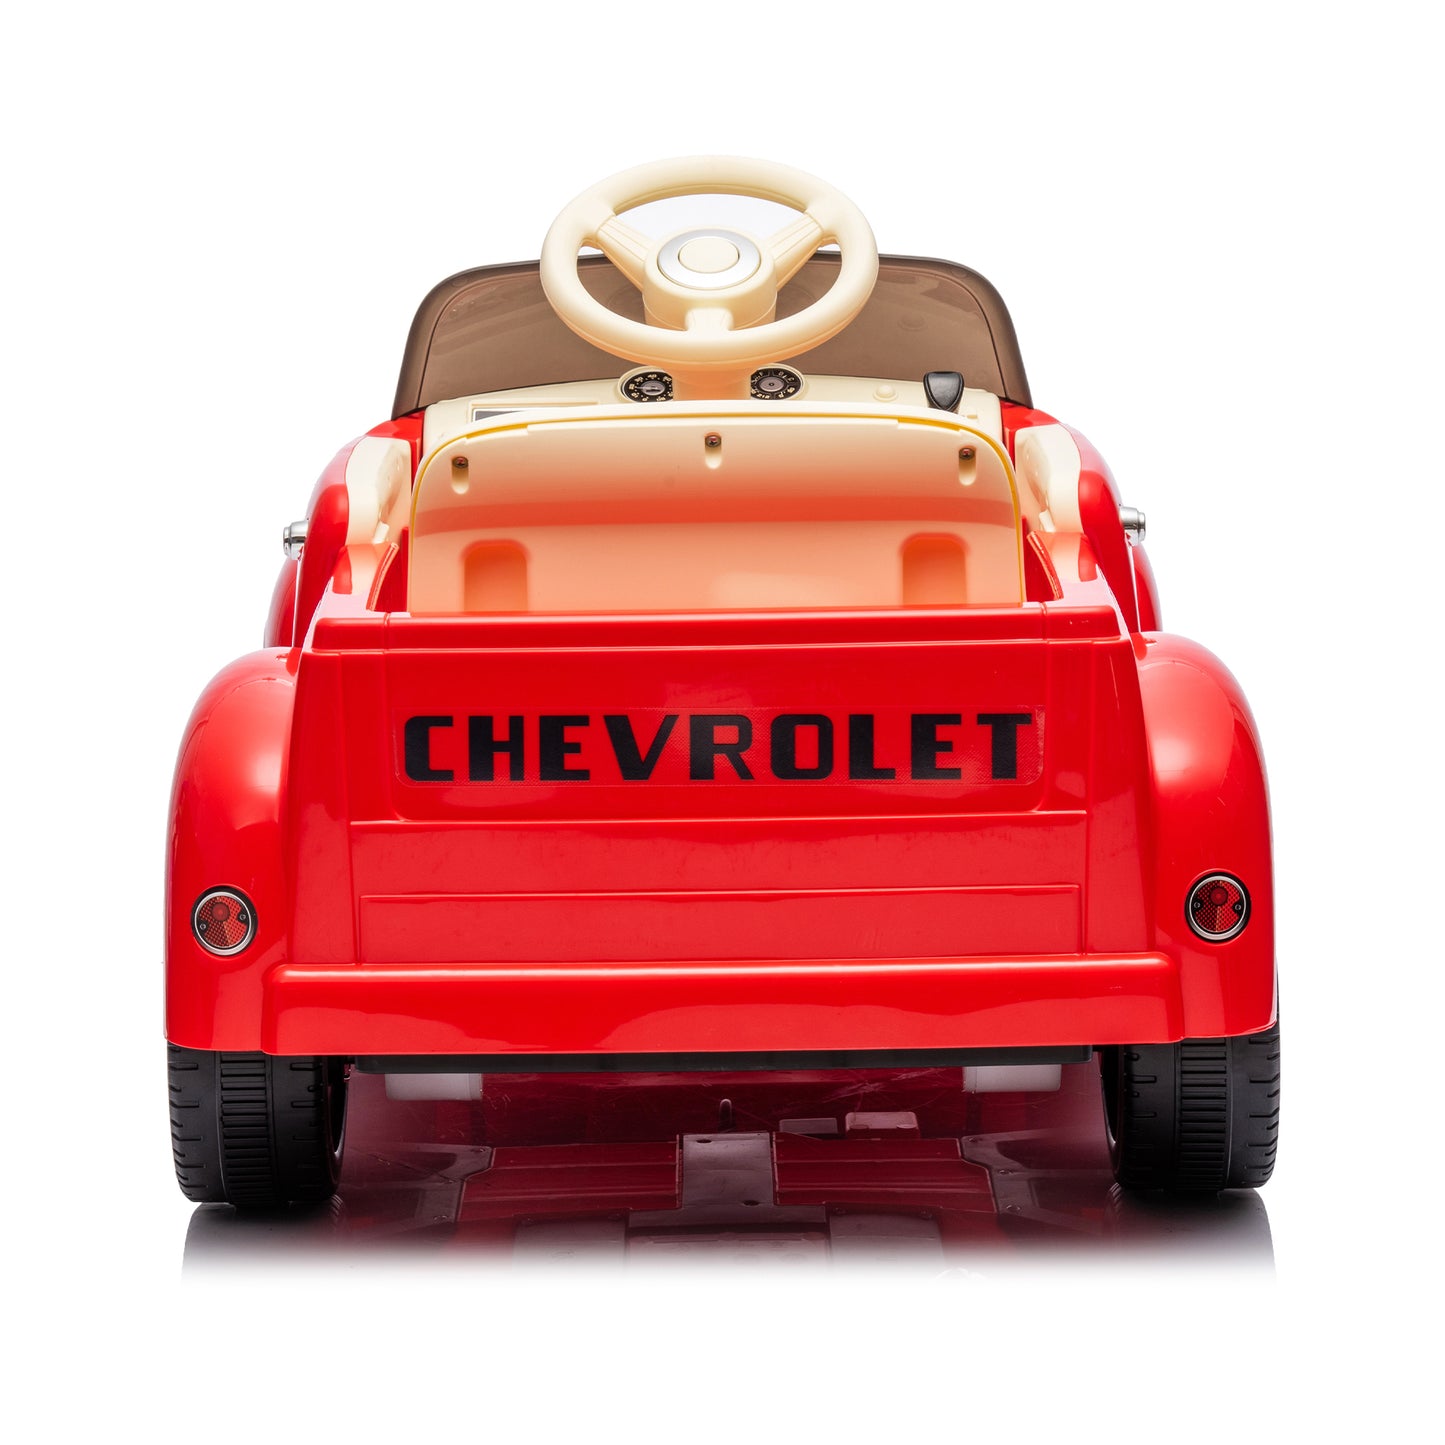 12V Kids Ride On truck car w/parents control, Licensed Chevrolet 3100 pickup,electric car for kid,Vintage modeling,3 speeds,LED Lights,Bluetooth,USB,High-power up to 3.11 MPH,age 3+